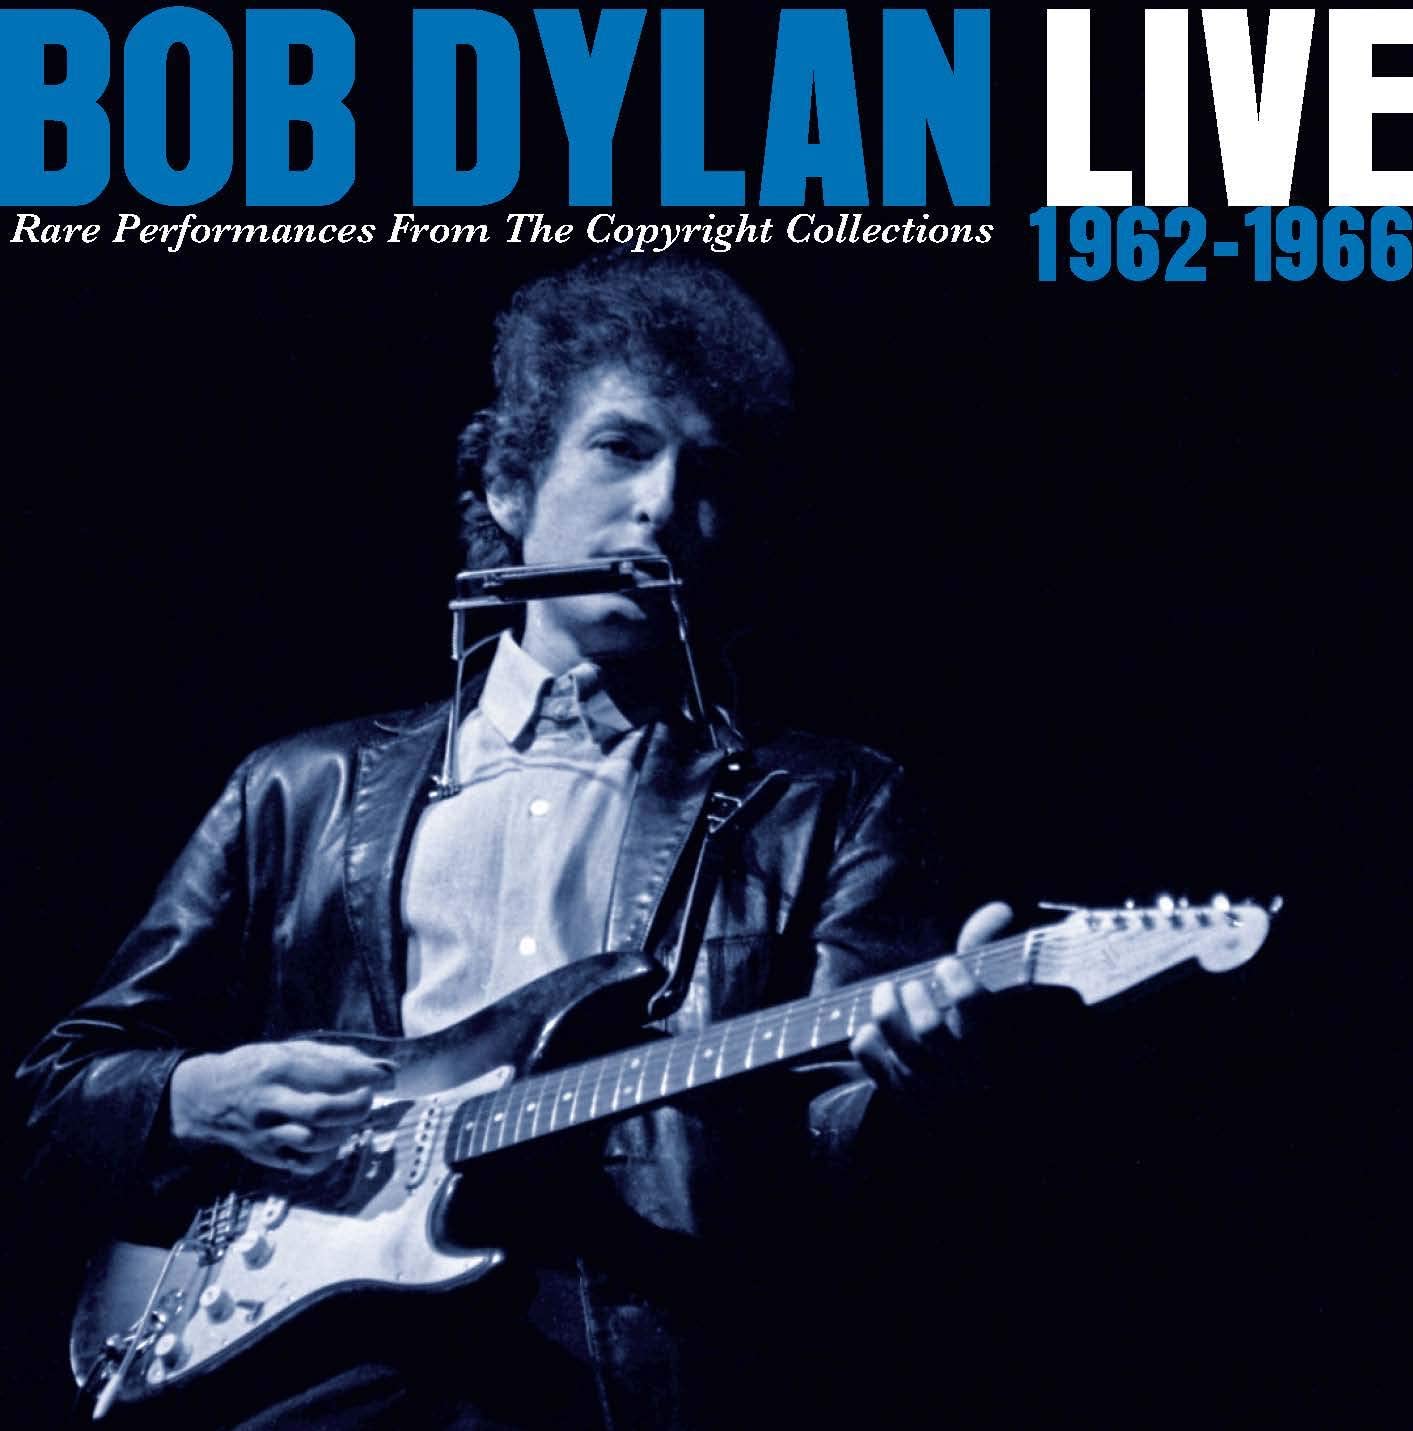 Dylan, Bob/Live - Rare Performances From The Copyright Collections 1962 - 19166 [CD]